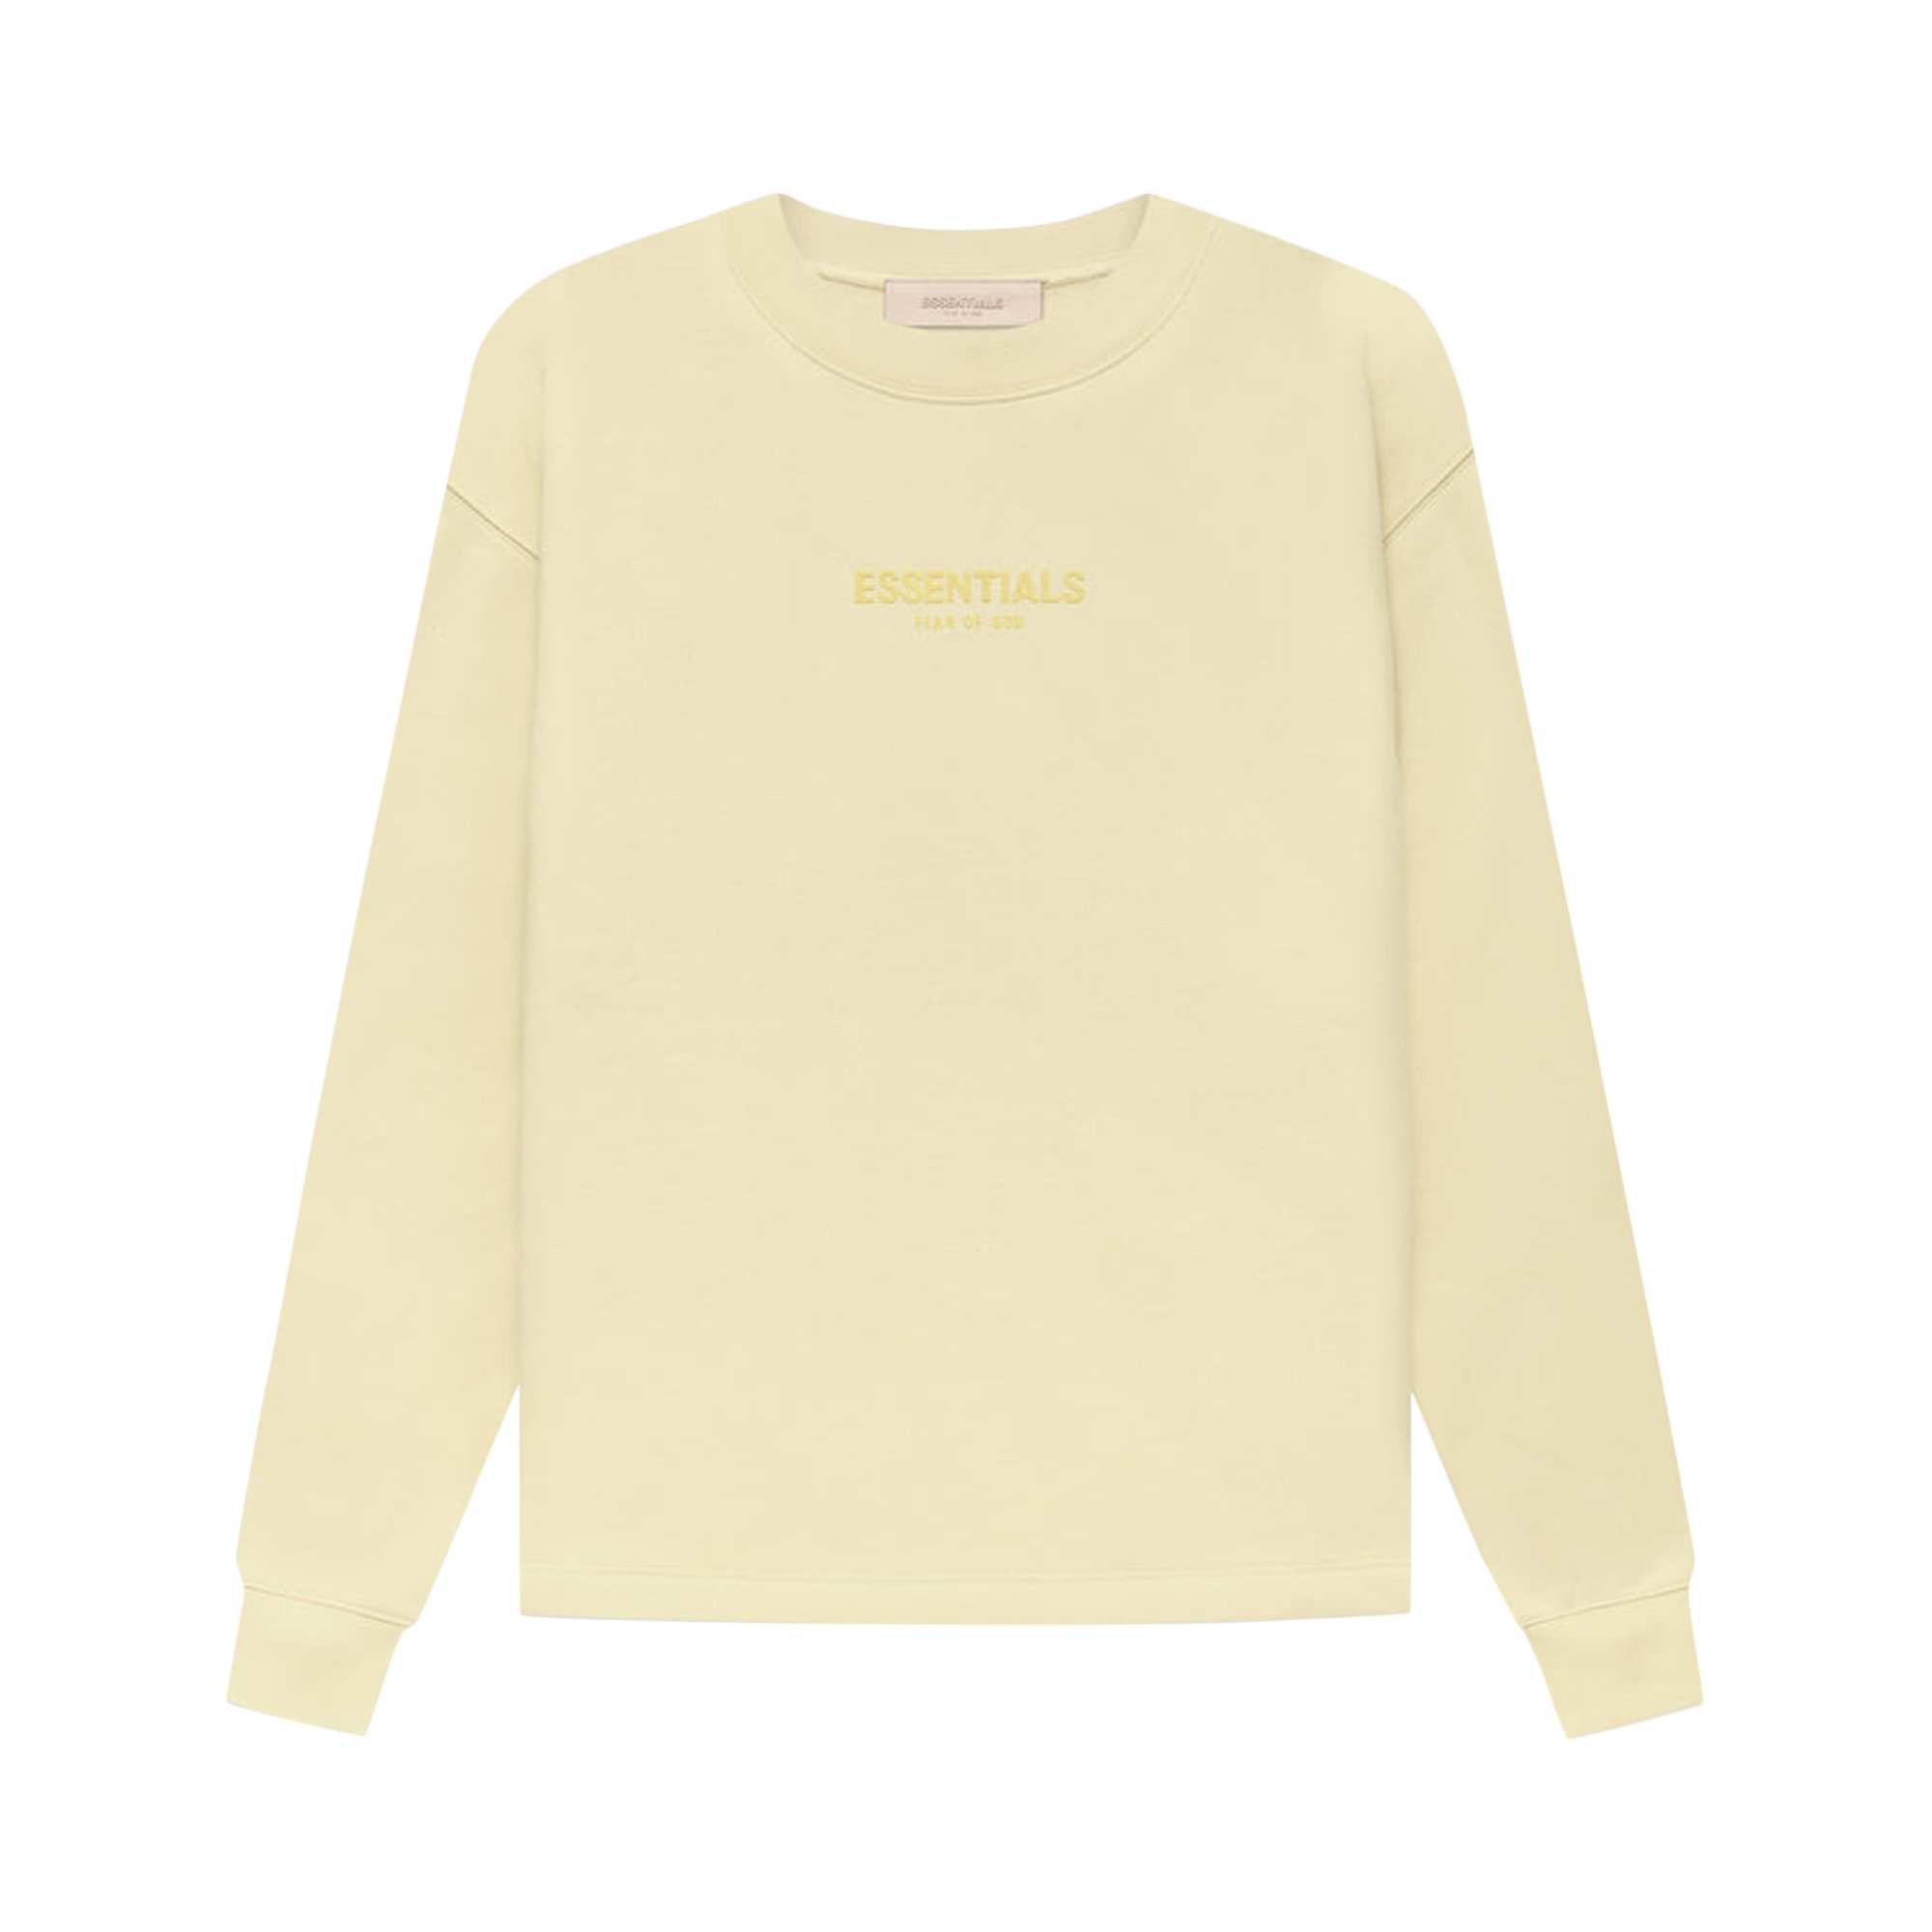 Buy Fear of God Essentials Relaxed Crewneck 'Canary